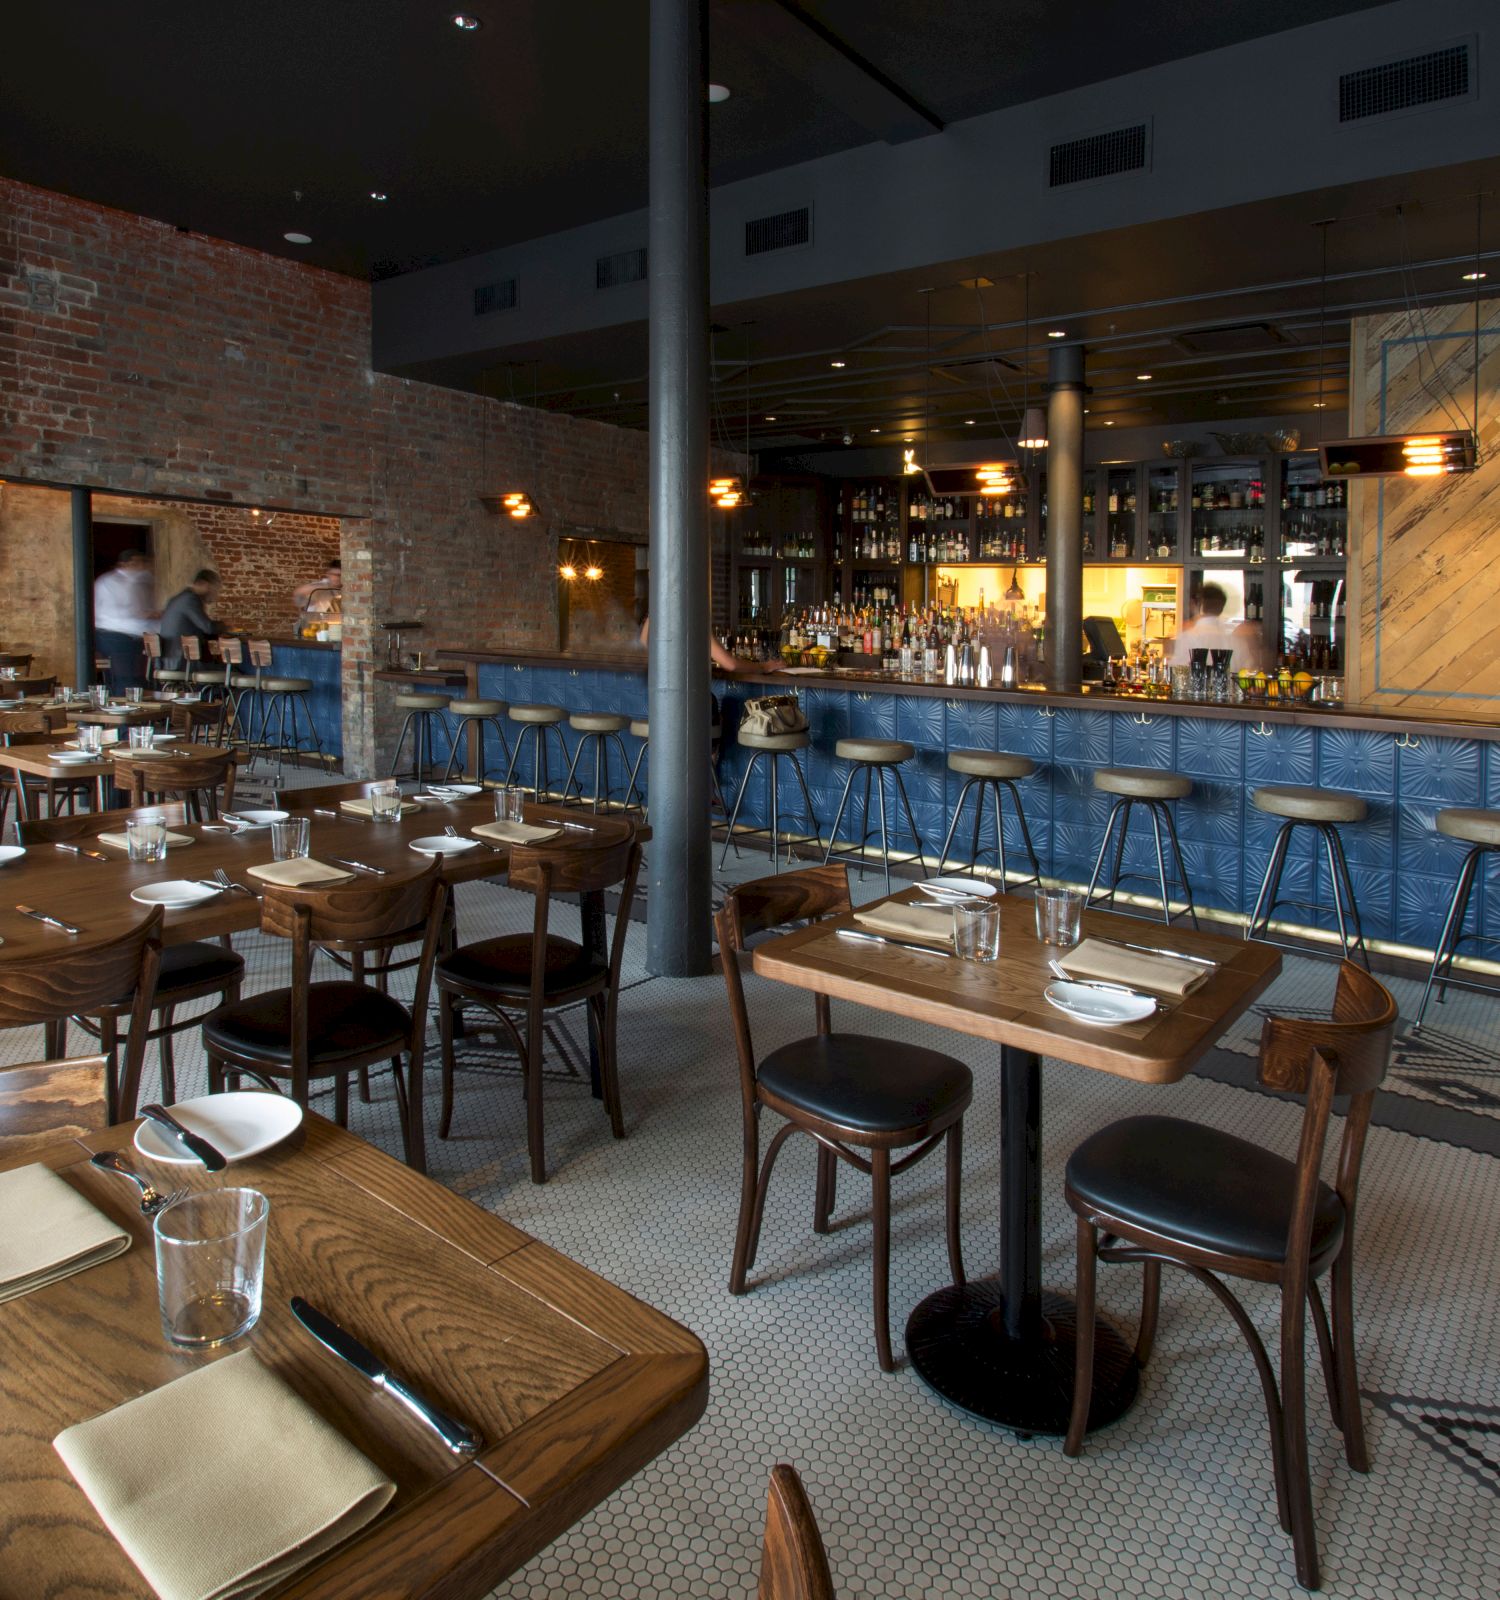 A modern restaurant with wooden tables set with plates and cutlery, brick walls, a blue-tiled bar with high stools, and a cozy ambiance.